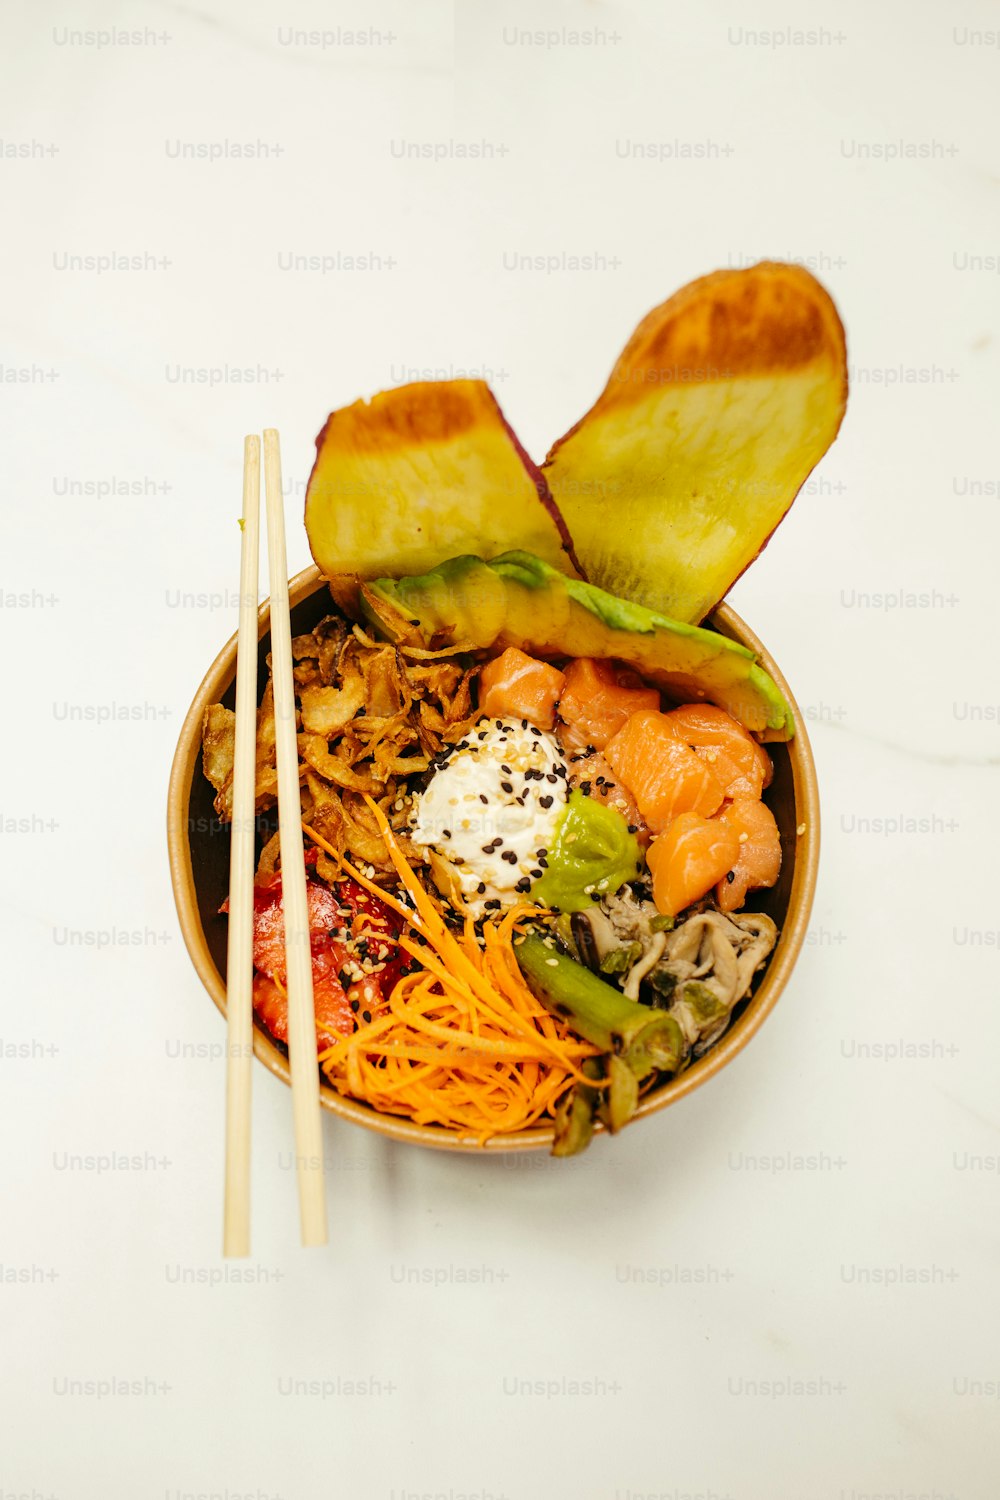 a bowl of food with chopsticks on the side